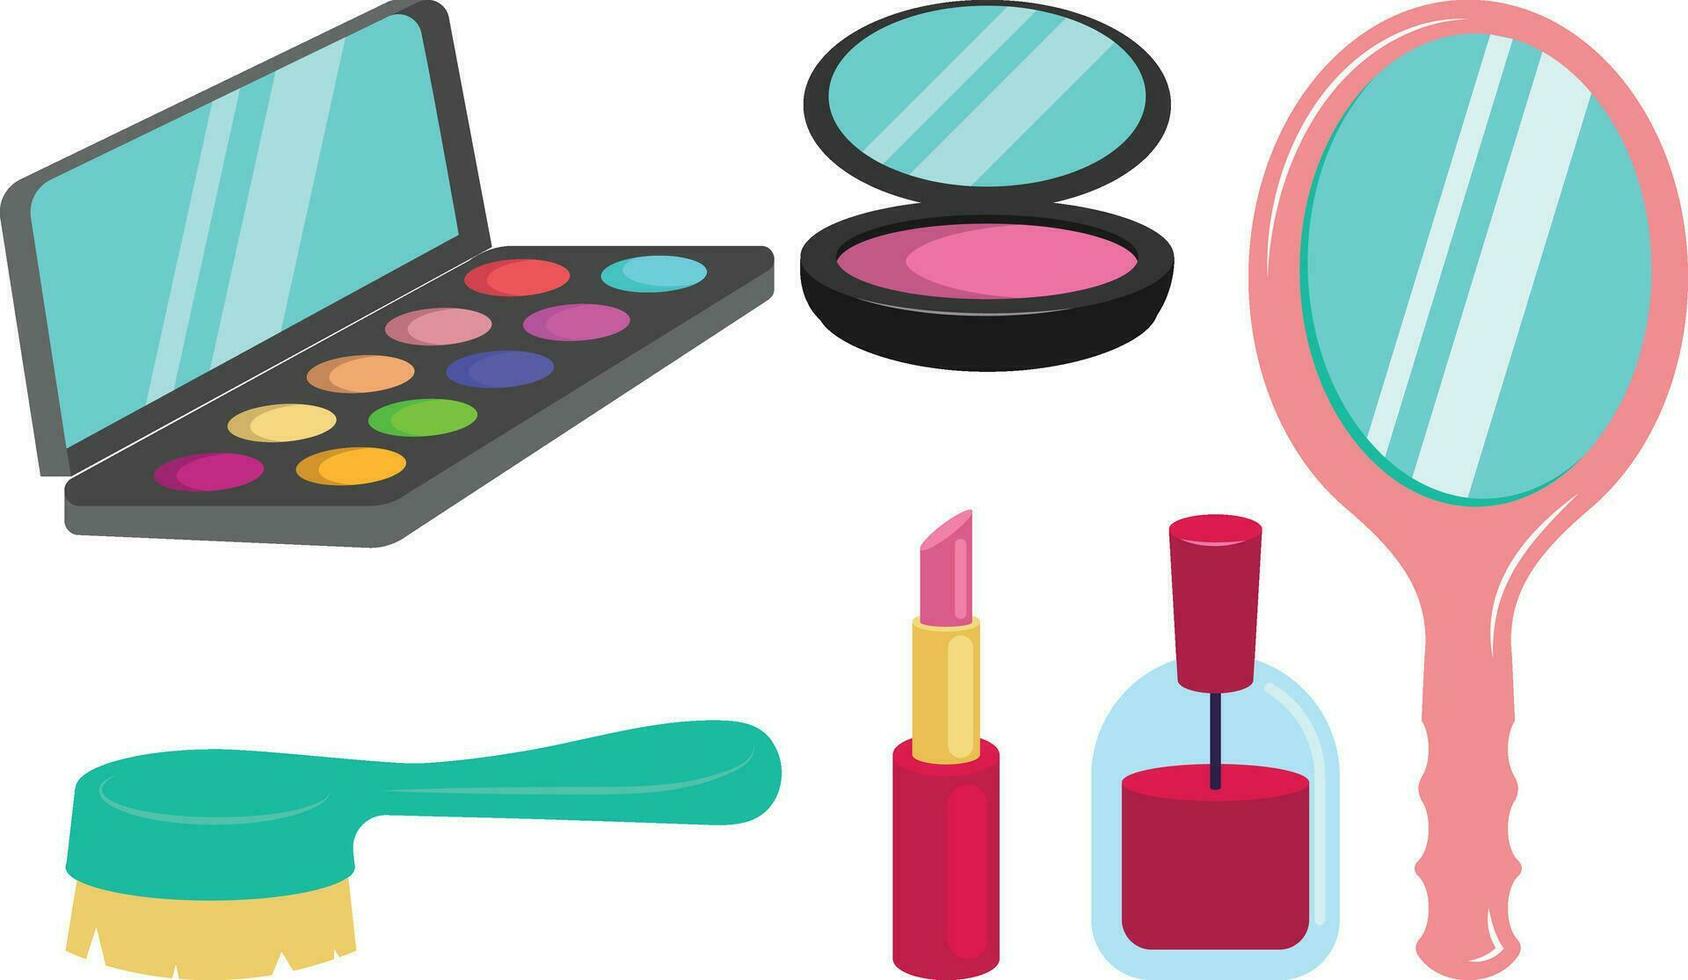 Colors Cosmetic Palette, Lipstick, Nail Polish, Blush Container, Mirror and Brush Makeup Icon Set in Cartoon Style vector